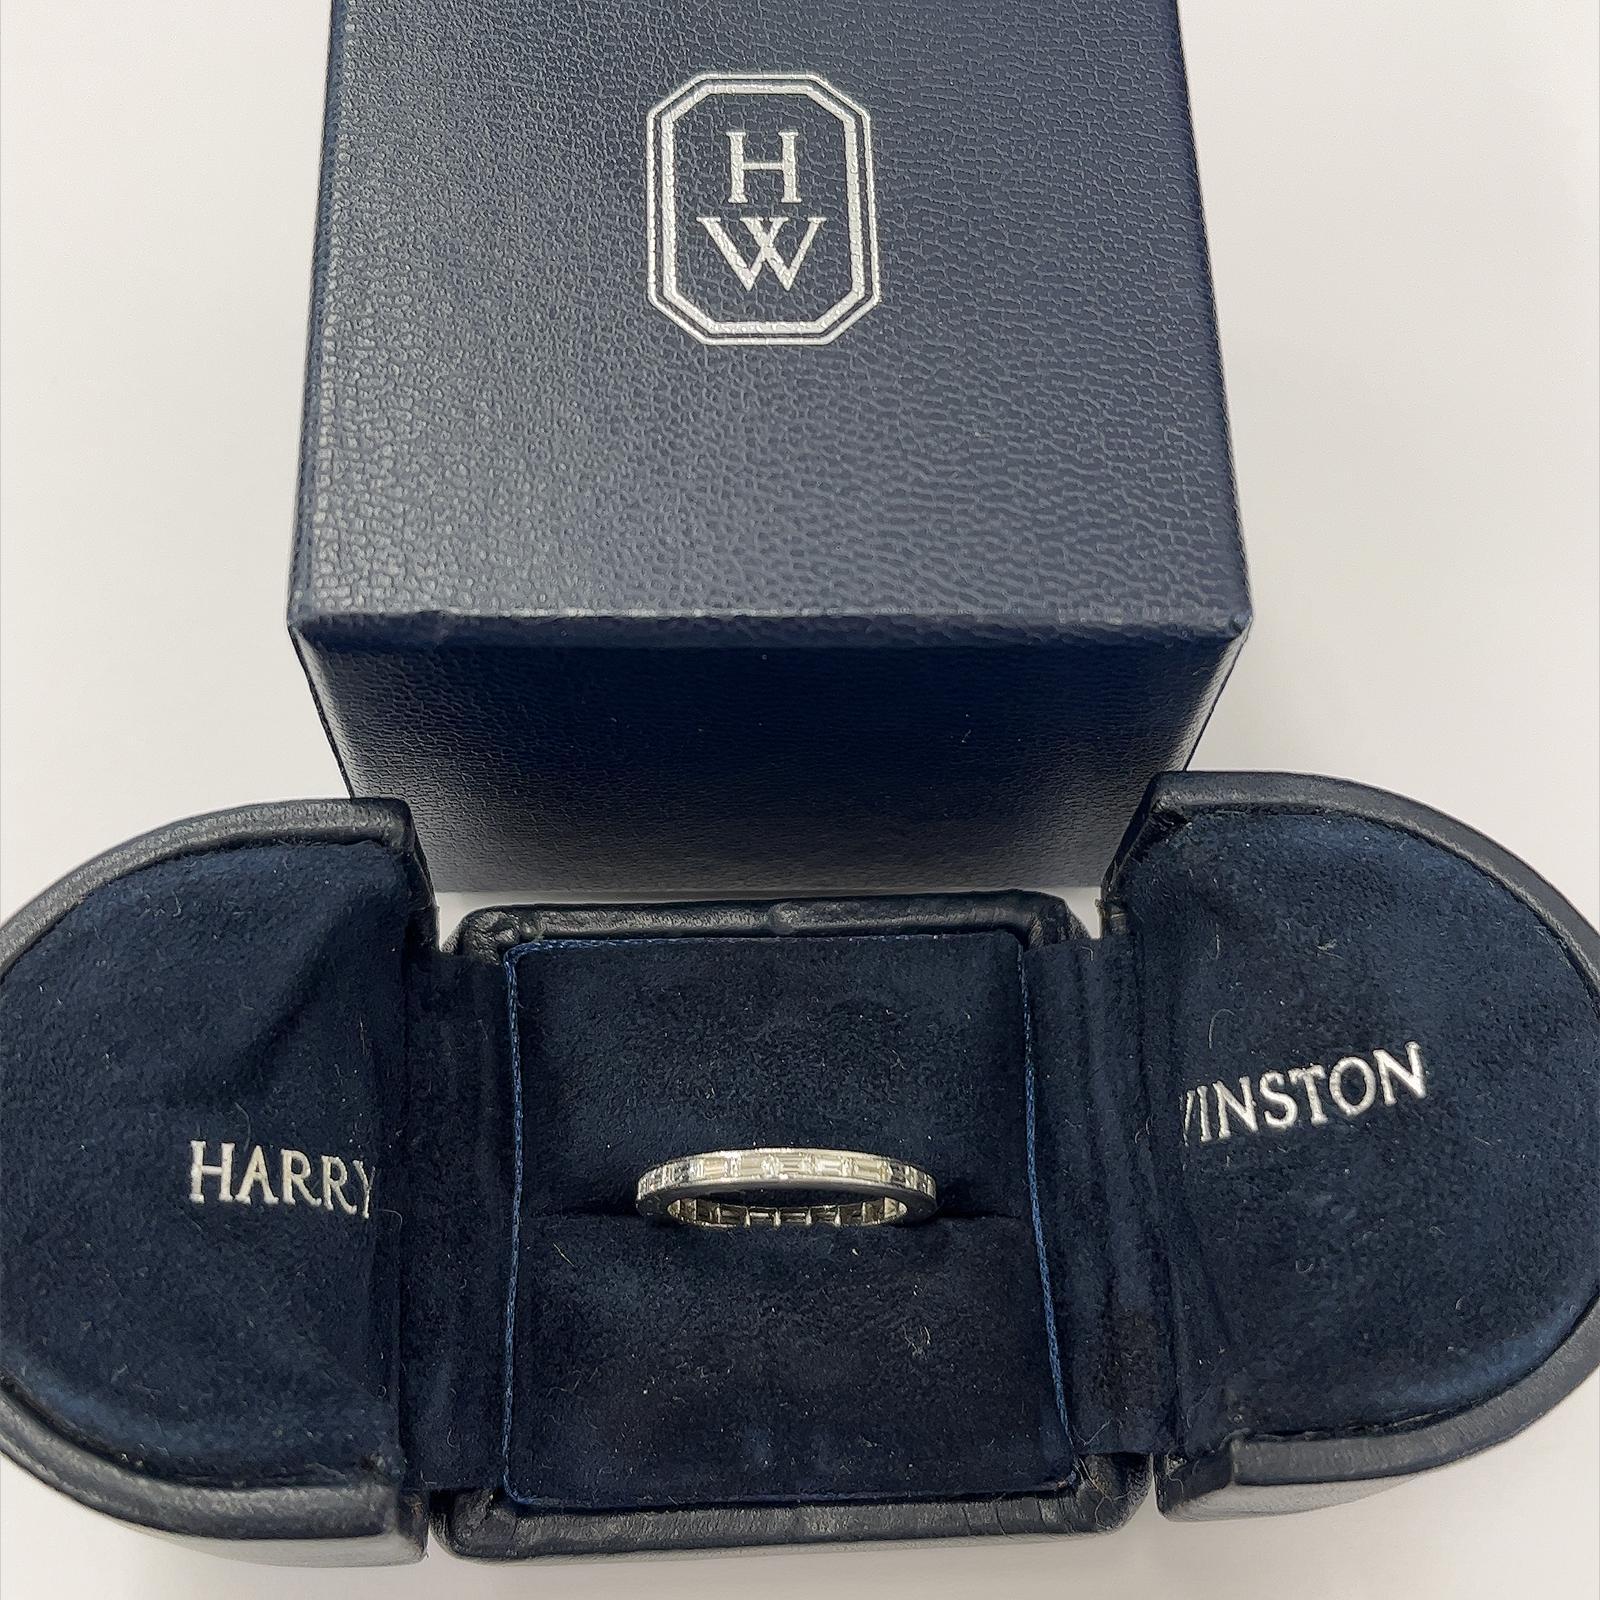 A Harry Winston Diamond Wedding Band 
set with baguette diamonds is a stunning choice 
for symbolizing everlasting love and commitment. 
baguette diamonds adds a unique and elegant touch to the wedding band. 
Baguette diamonds are known for their